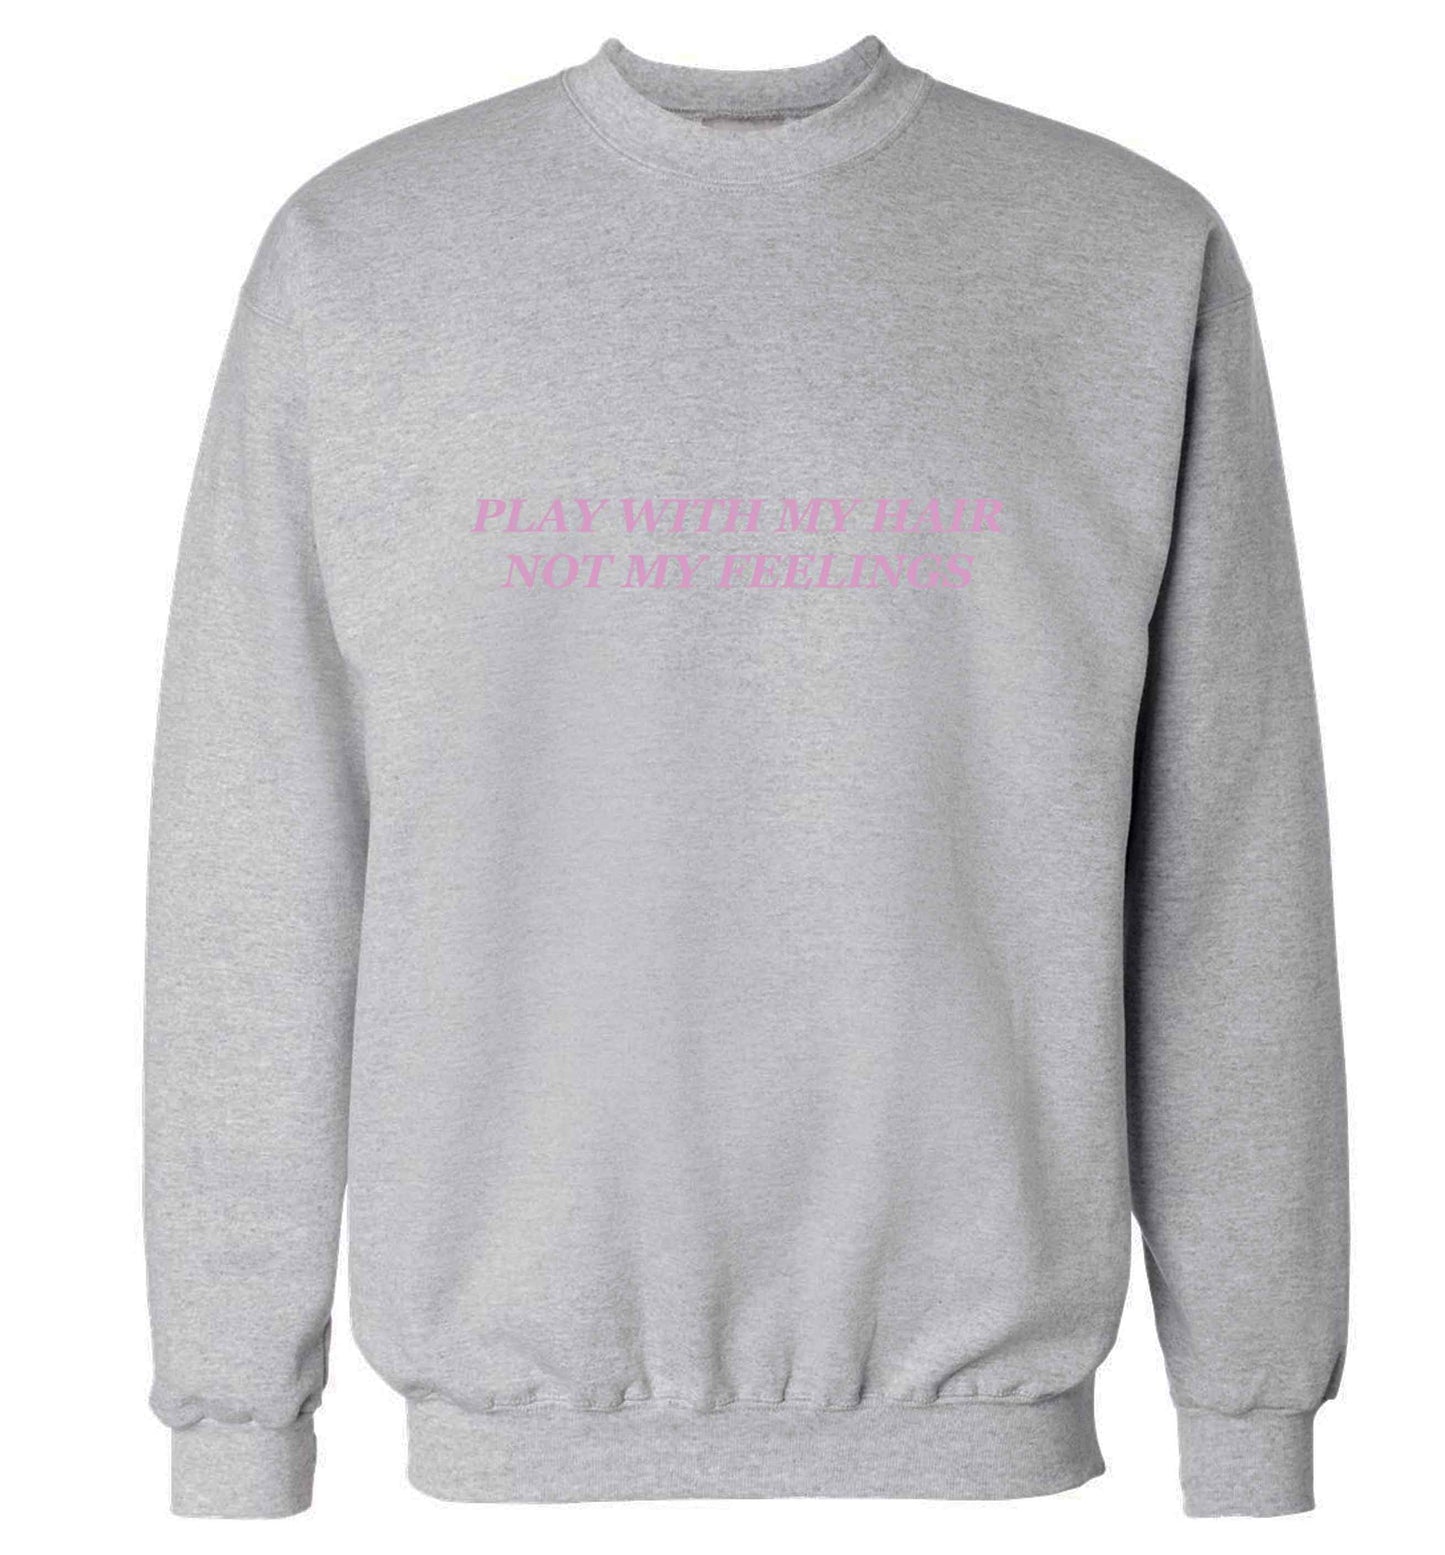 Play with my hair not my feelings adult's unisex grey sweater 2XL